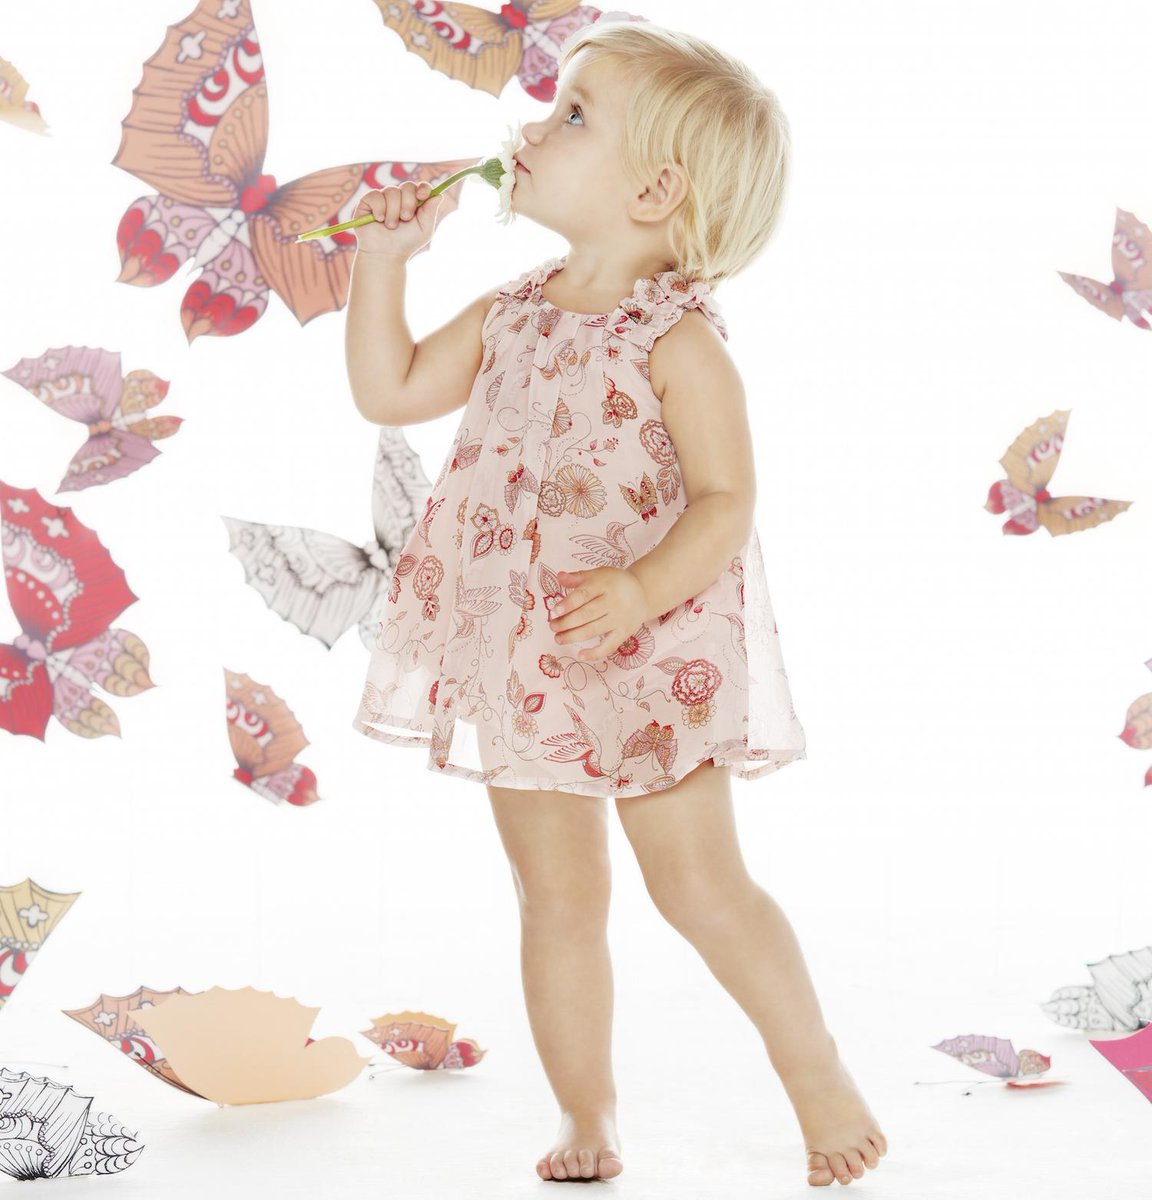 New @KardashianKids styles for girls have launched at BIG W Australia! Shop online here http://t.co/cu1Vtgo9oD http://t.co/aJiZOhXuld